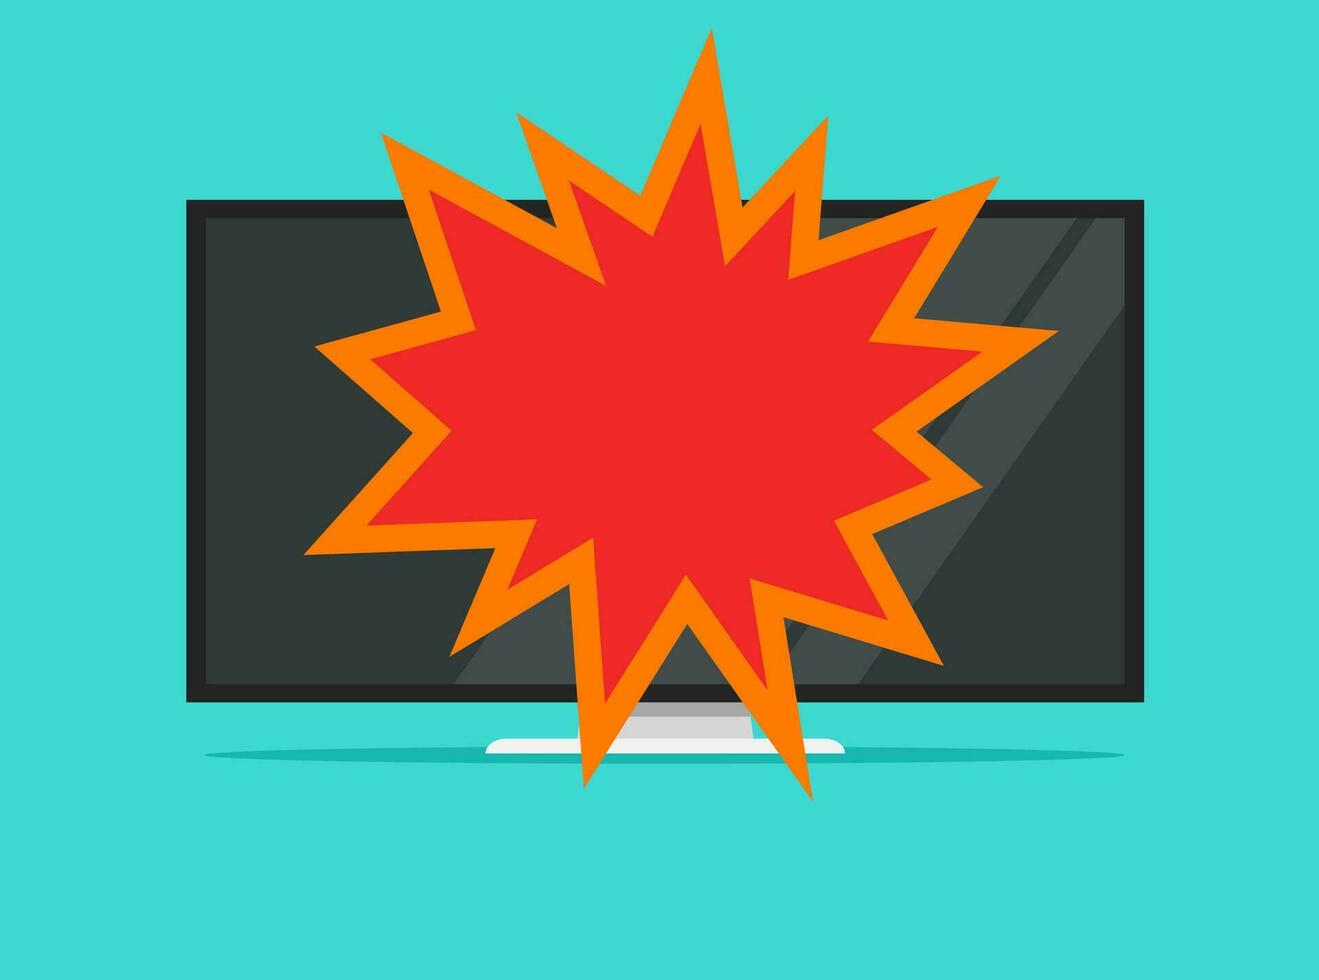 Broken led tv screen or crashed computer monitor vector flat cartoon illustration, destroyed with explosion wide screen television display modern design image